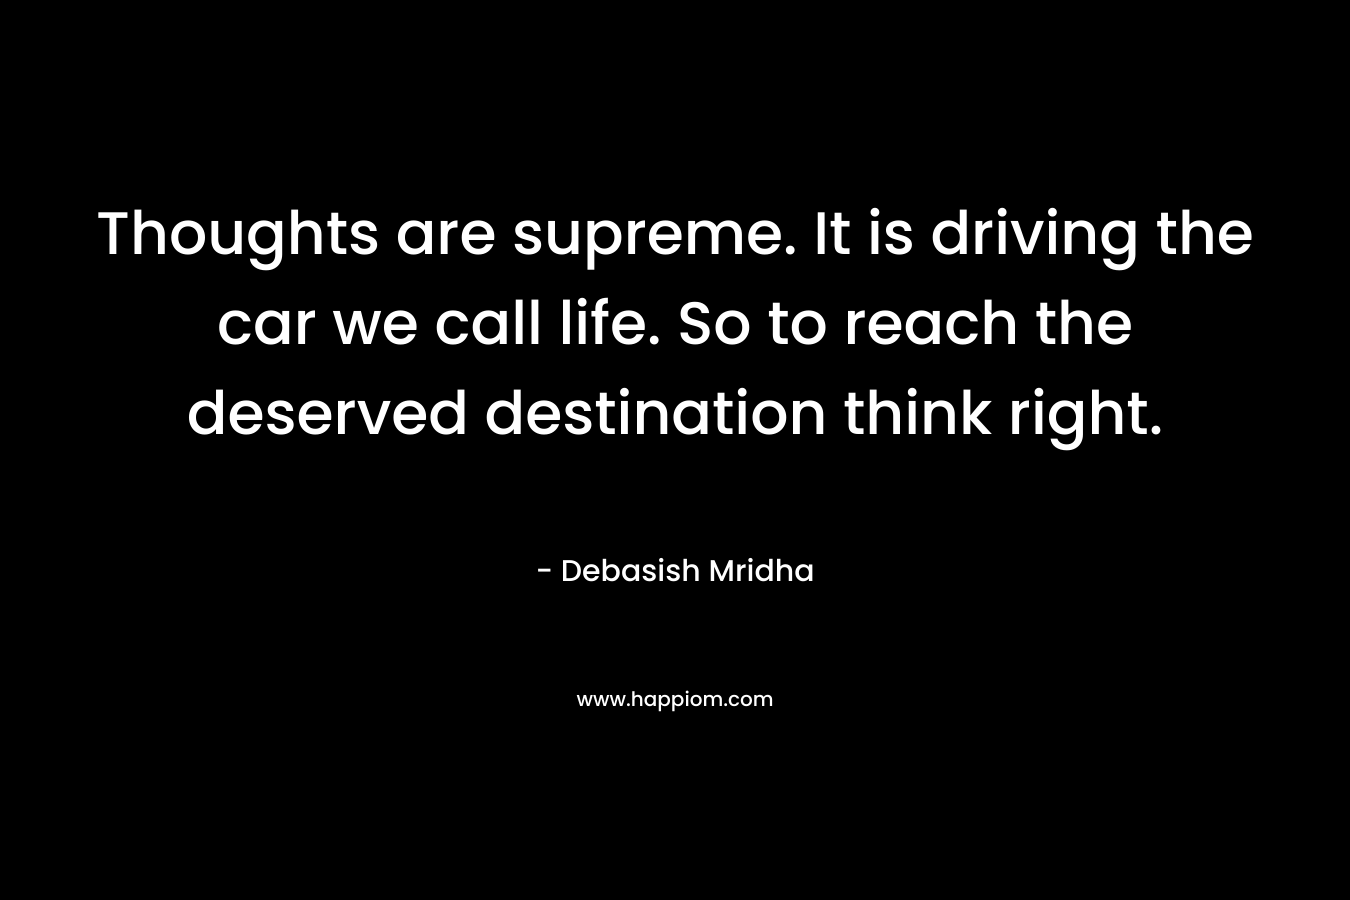 Thoughts are supreme. It is driving the car we call life. So to reach the deserved destination think right. – Debasish Mridha